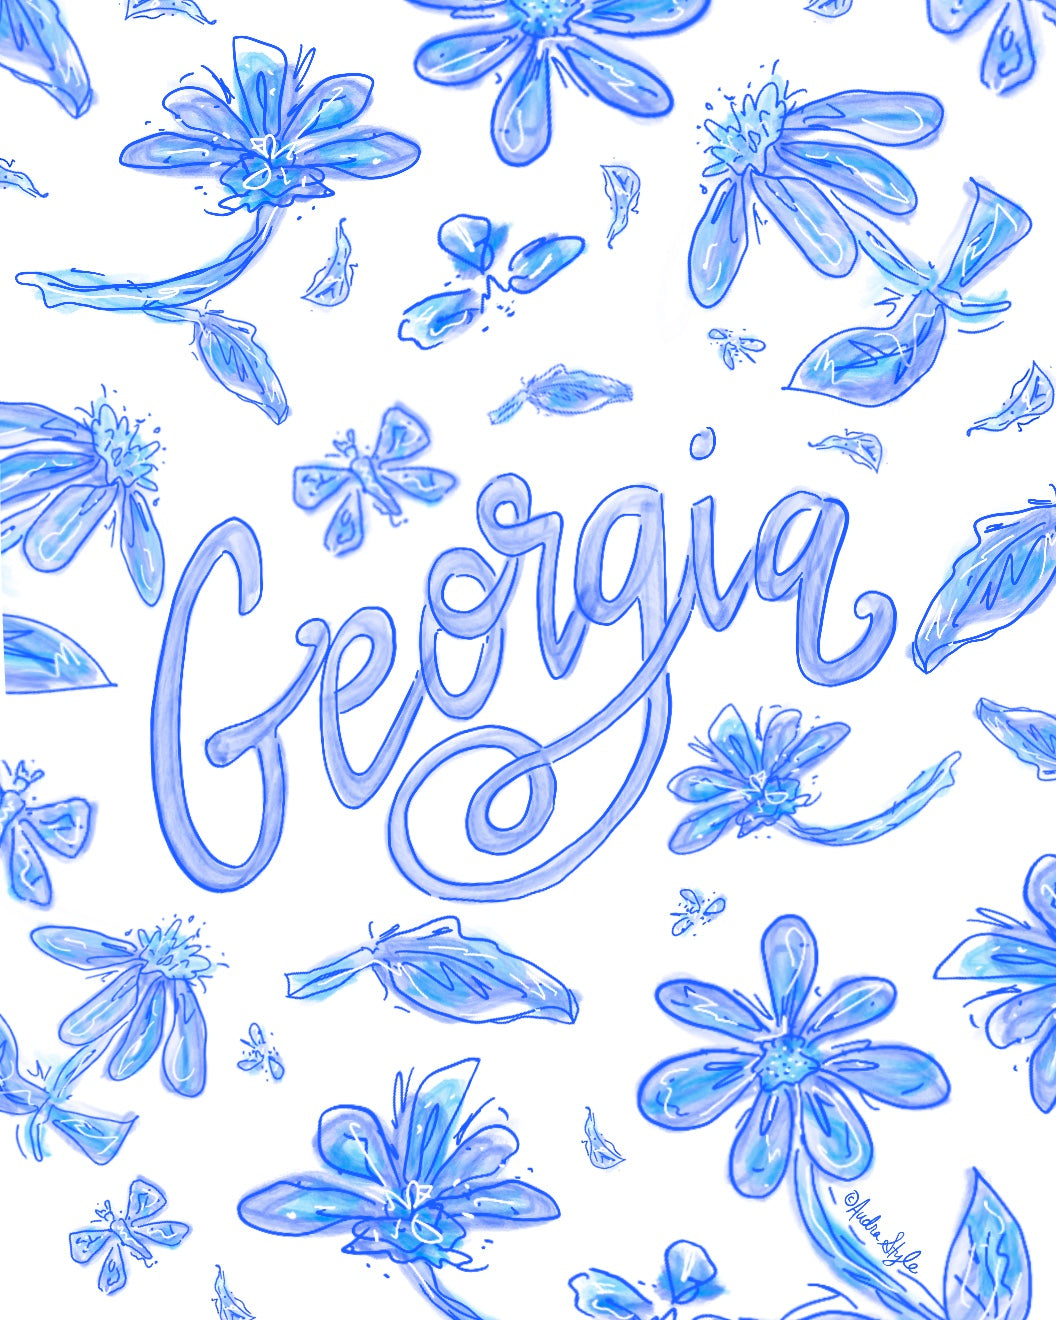 Blue and White Georgia Floral Reproduction Print